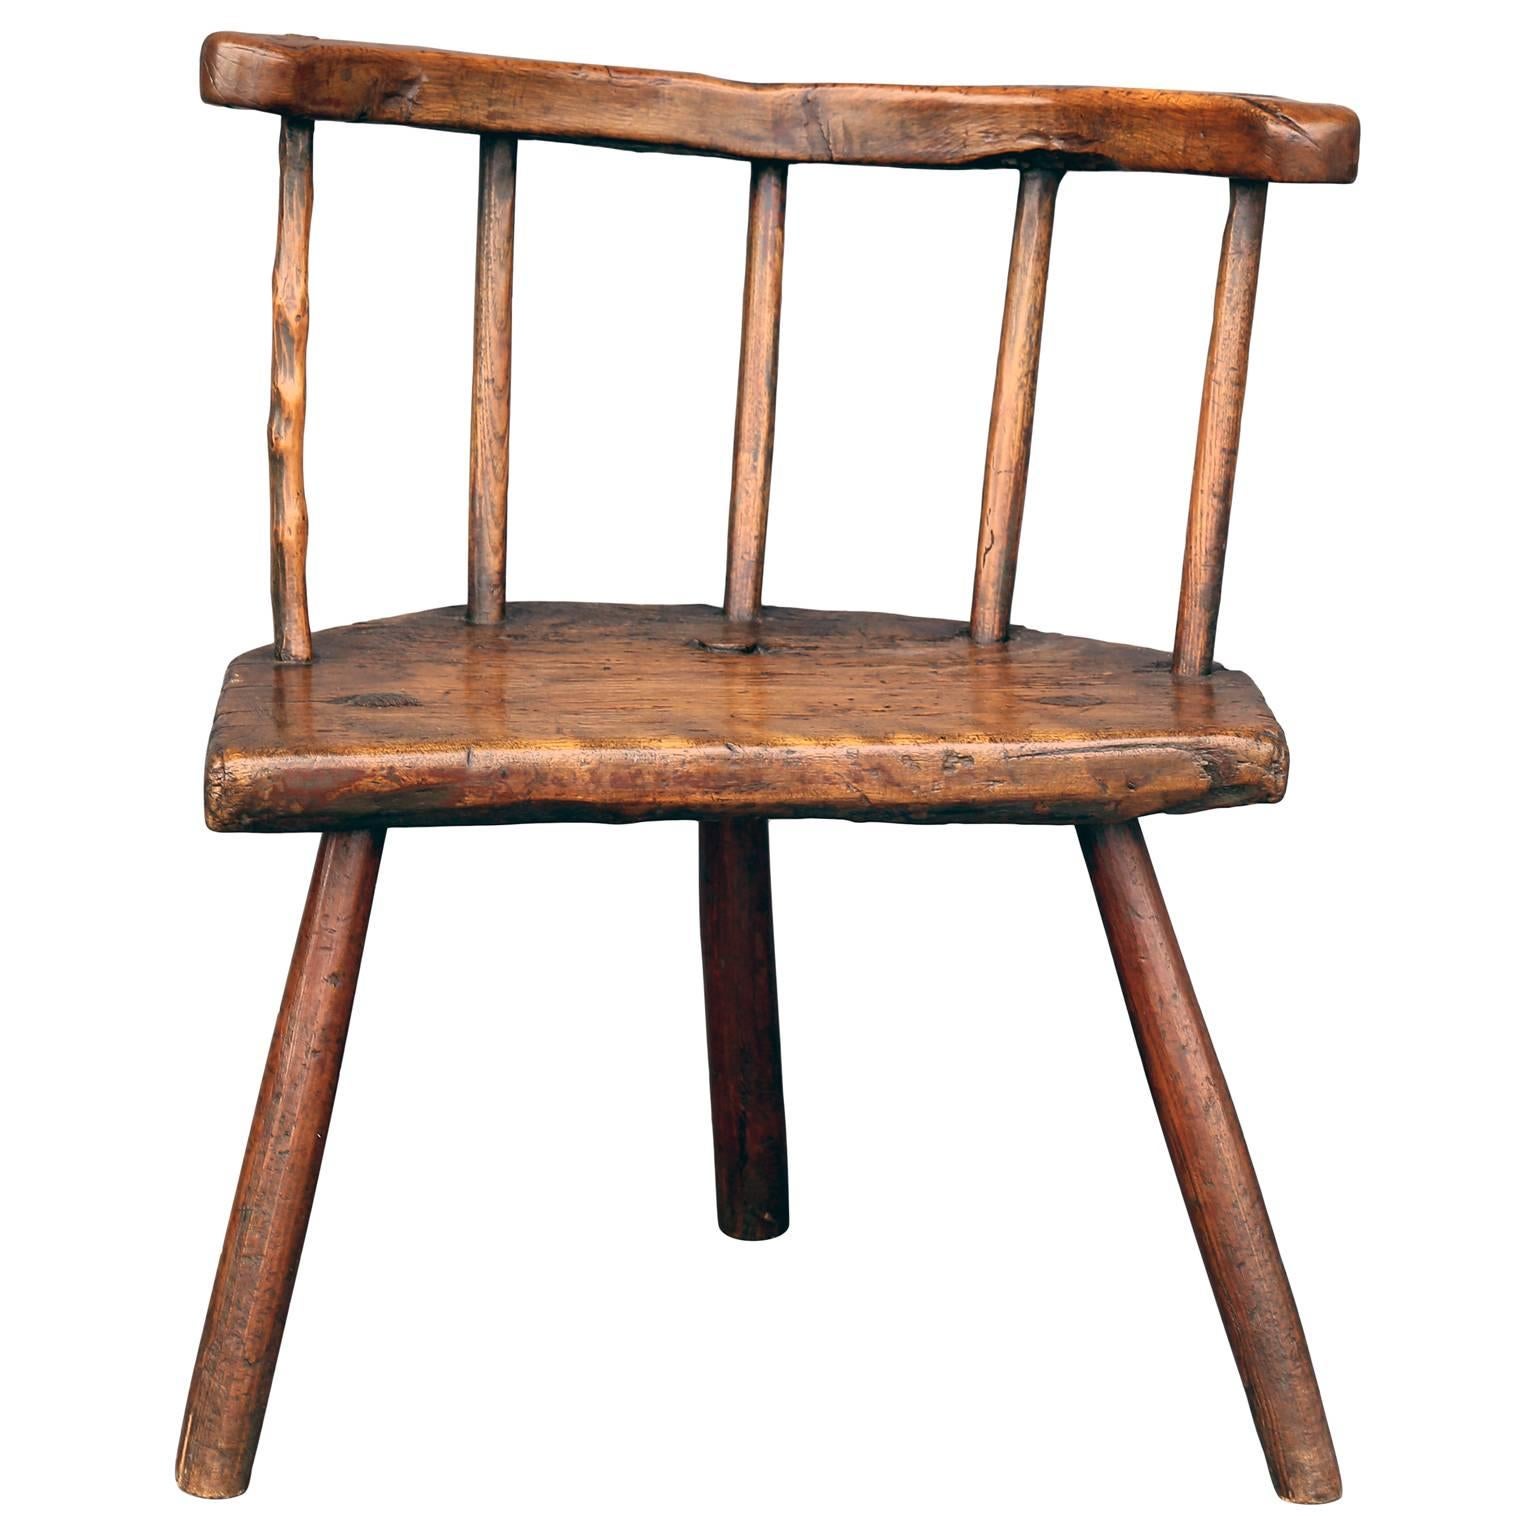 A whimsical, primitive early 18th century Welsh stick chair from ash and elm wood with a well-patinated finish, traces of old dark green milk paint under the horse-shoe arm and morticed construction. Its one-piece horse-shoe shaped arm, three